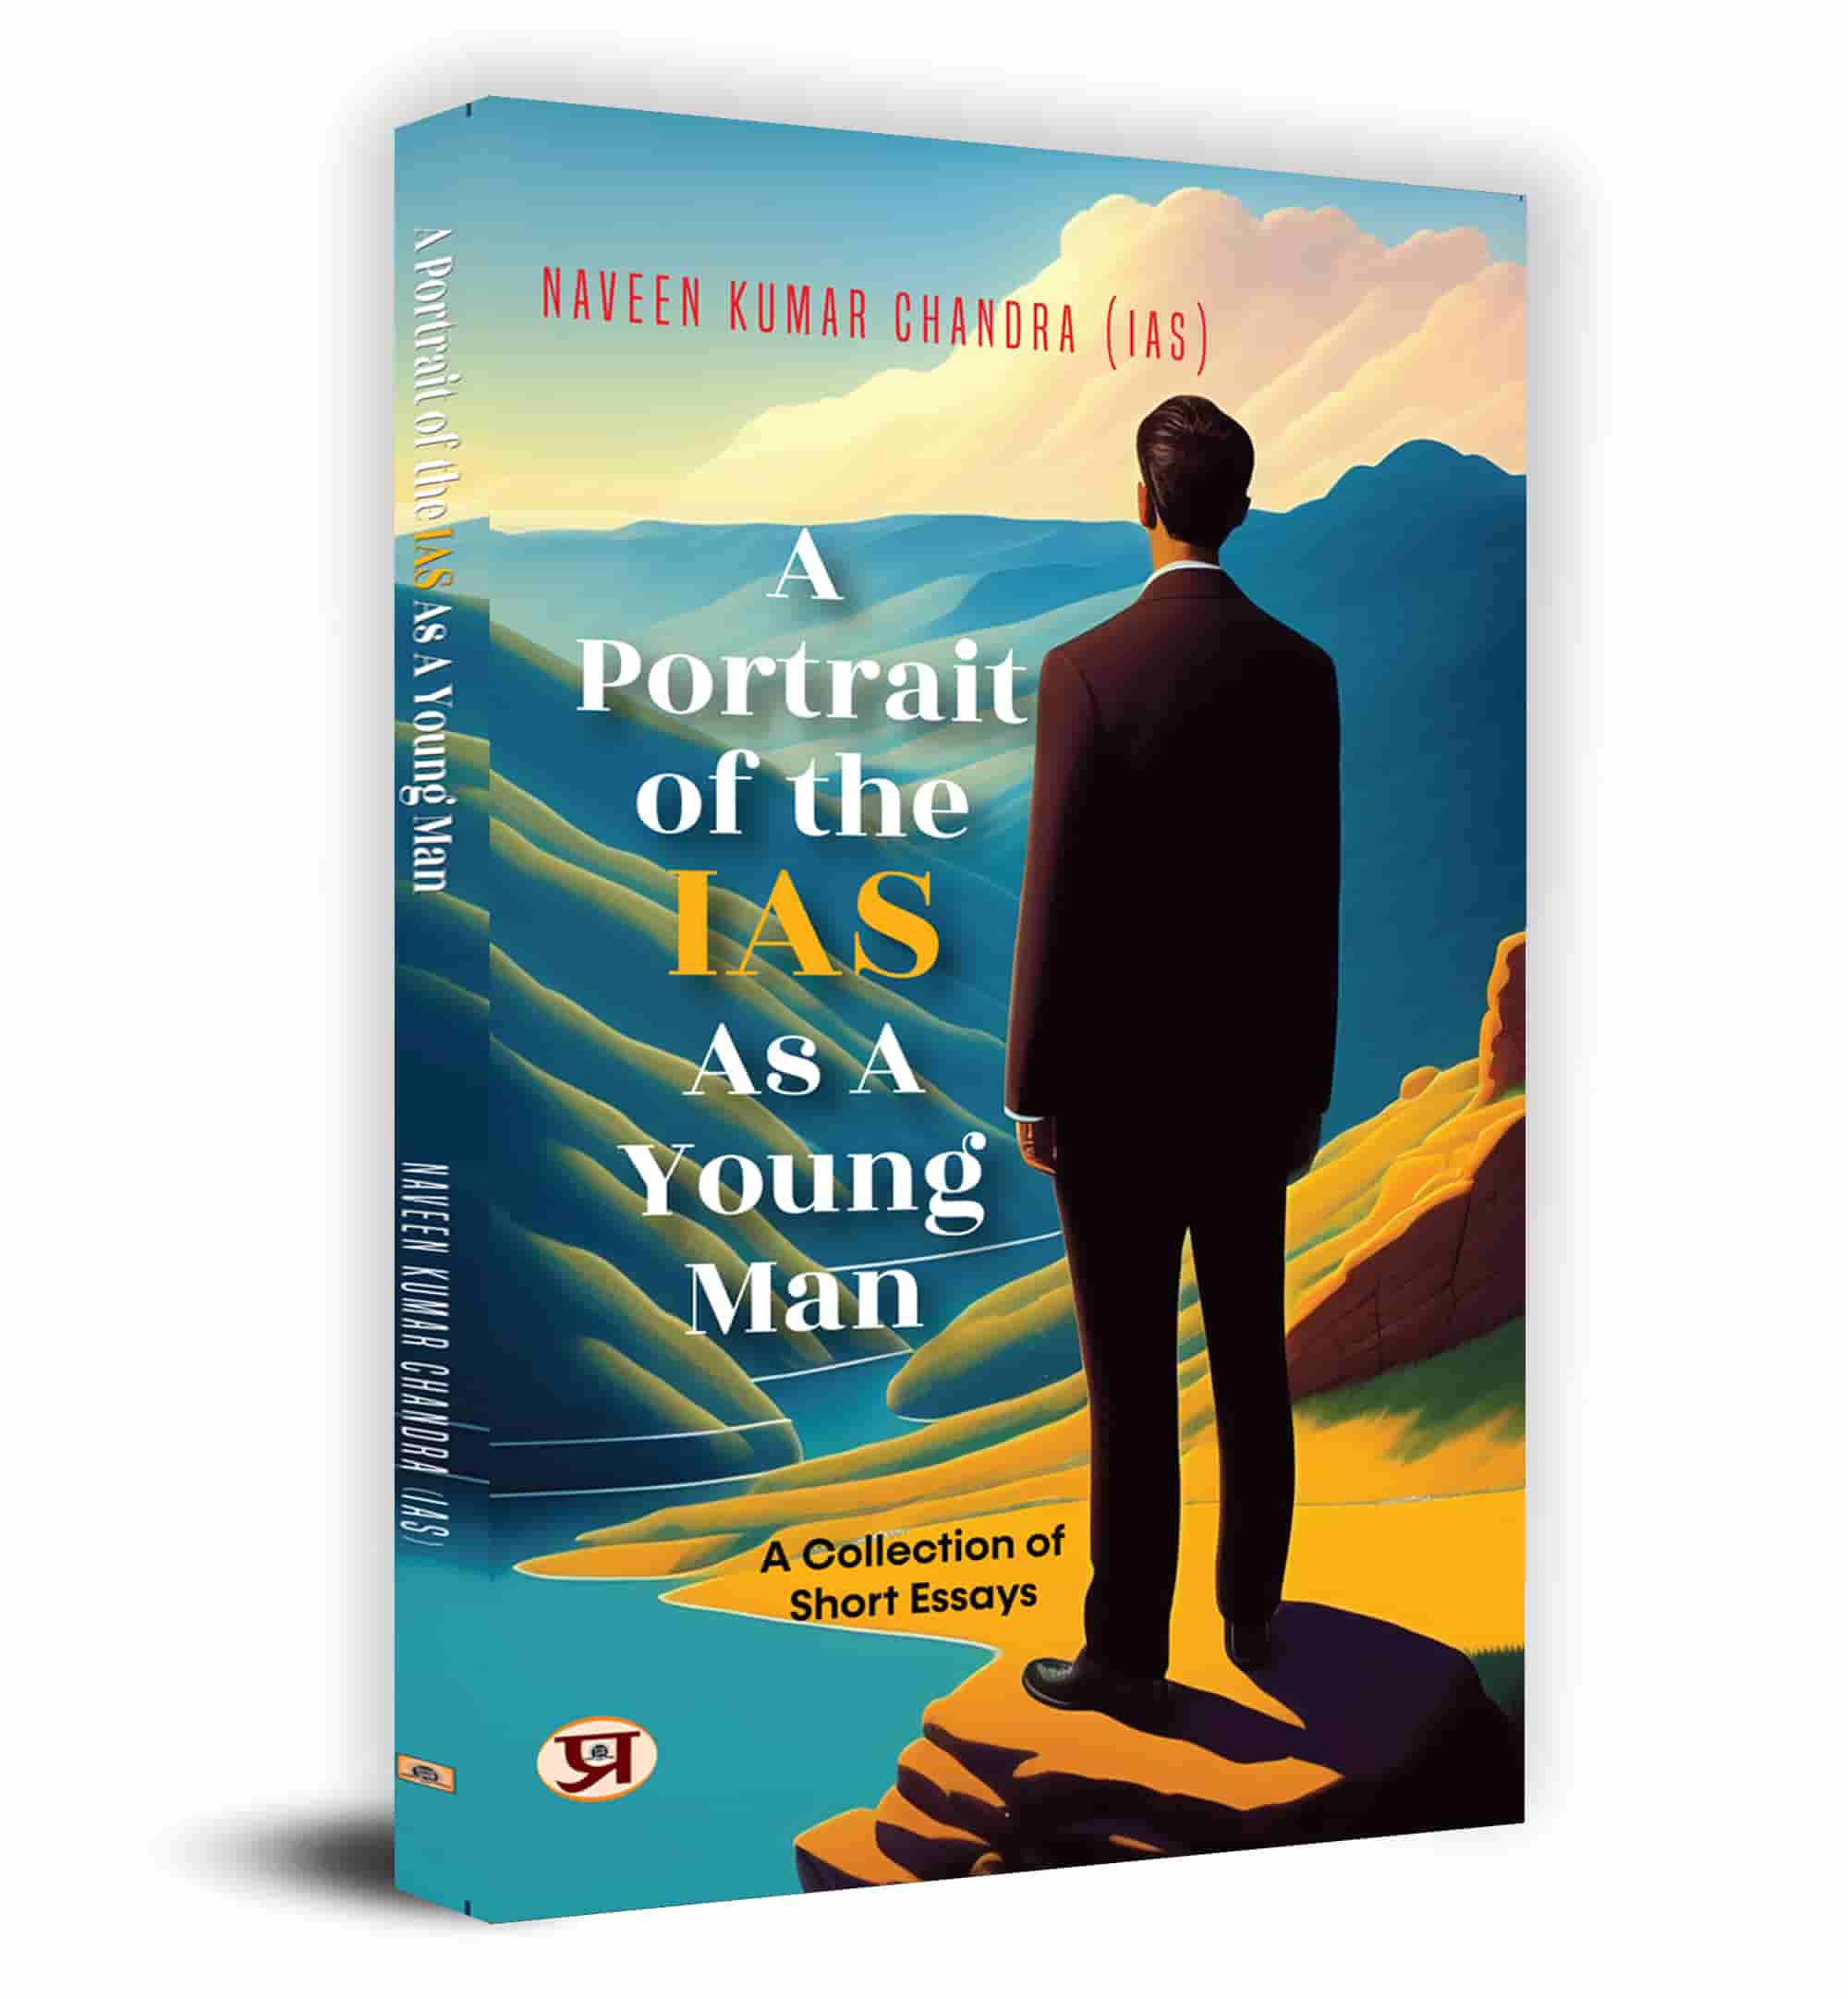 A Portrait of the IAS as A Young Man: A Collection of Short Essays by Naveen Kumar Chandra IAS (Book in English)